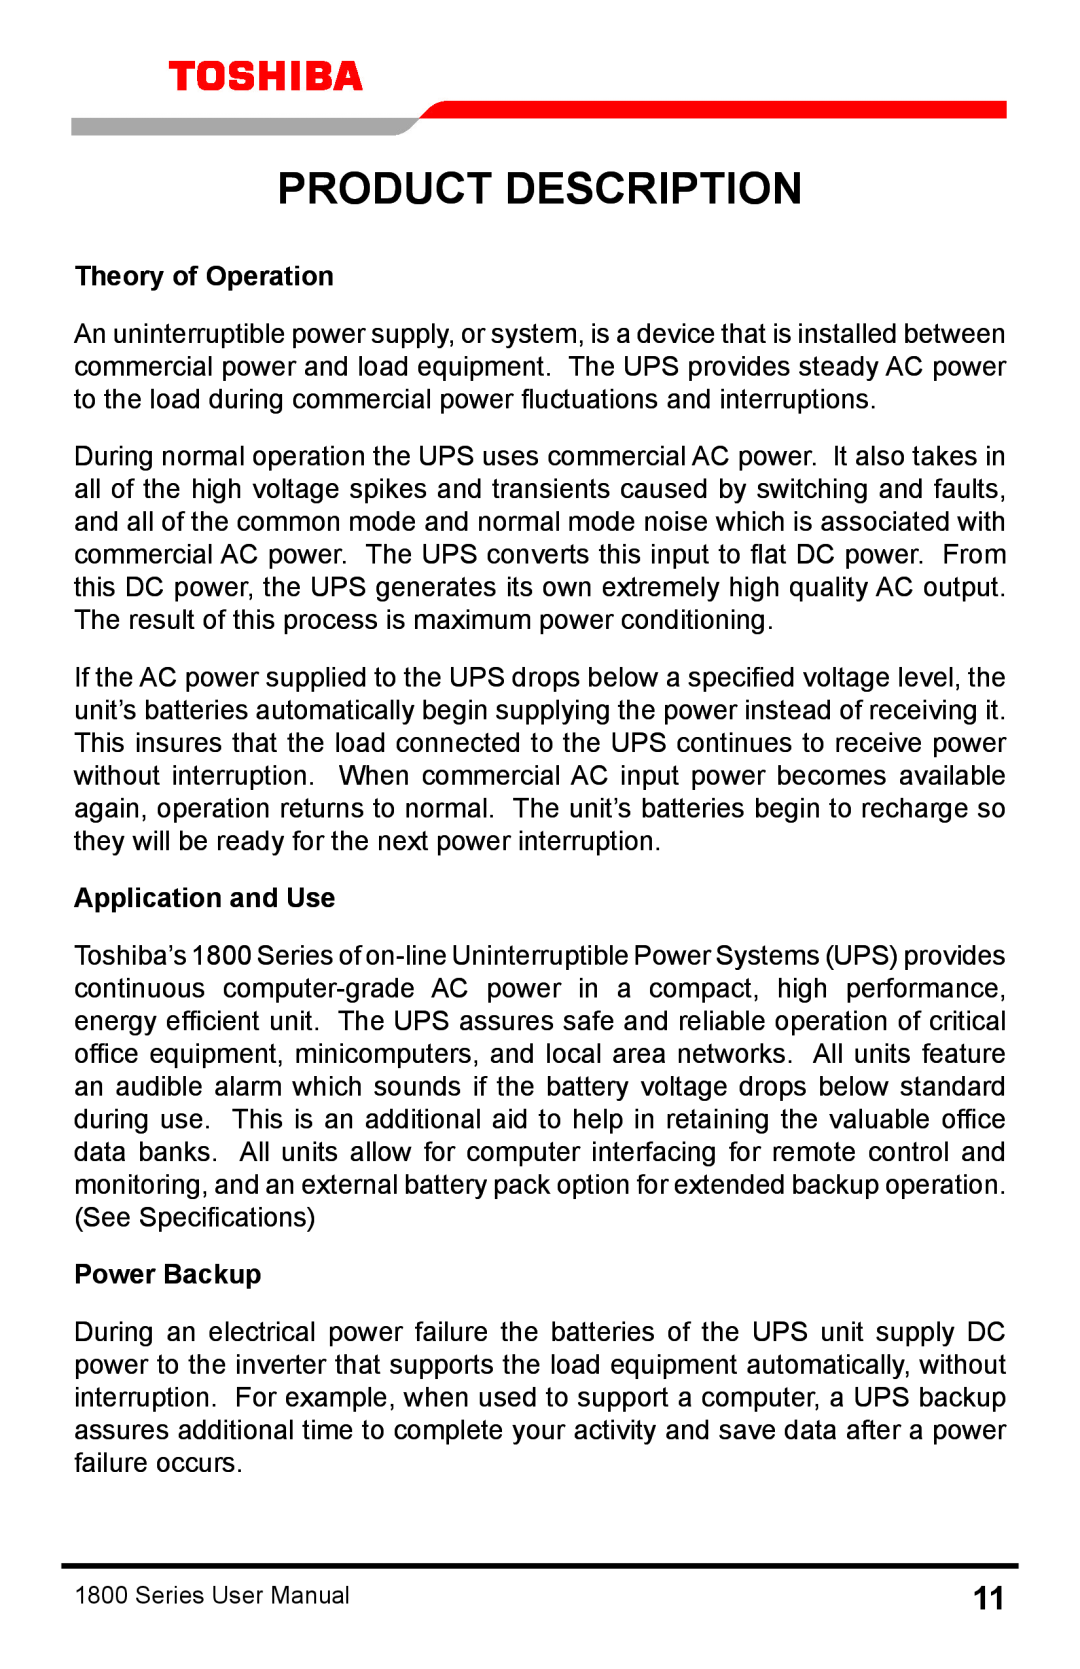 Toshiba 1800 manual Product Description, Theory of Operation, Application and Use, Power Backup 